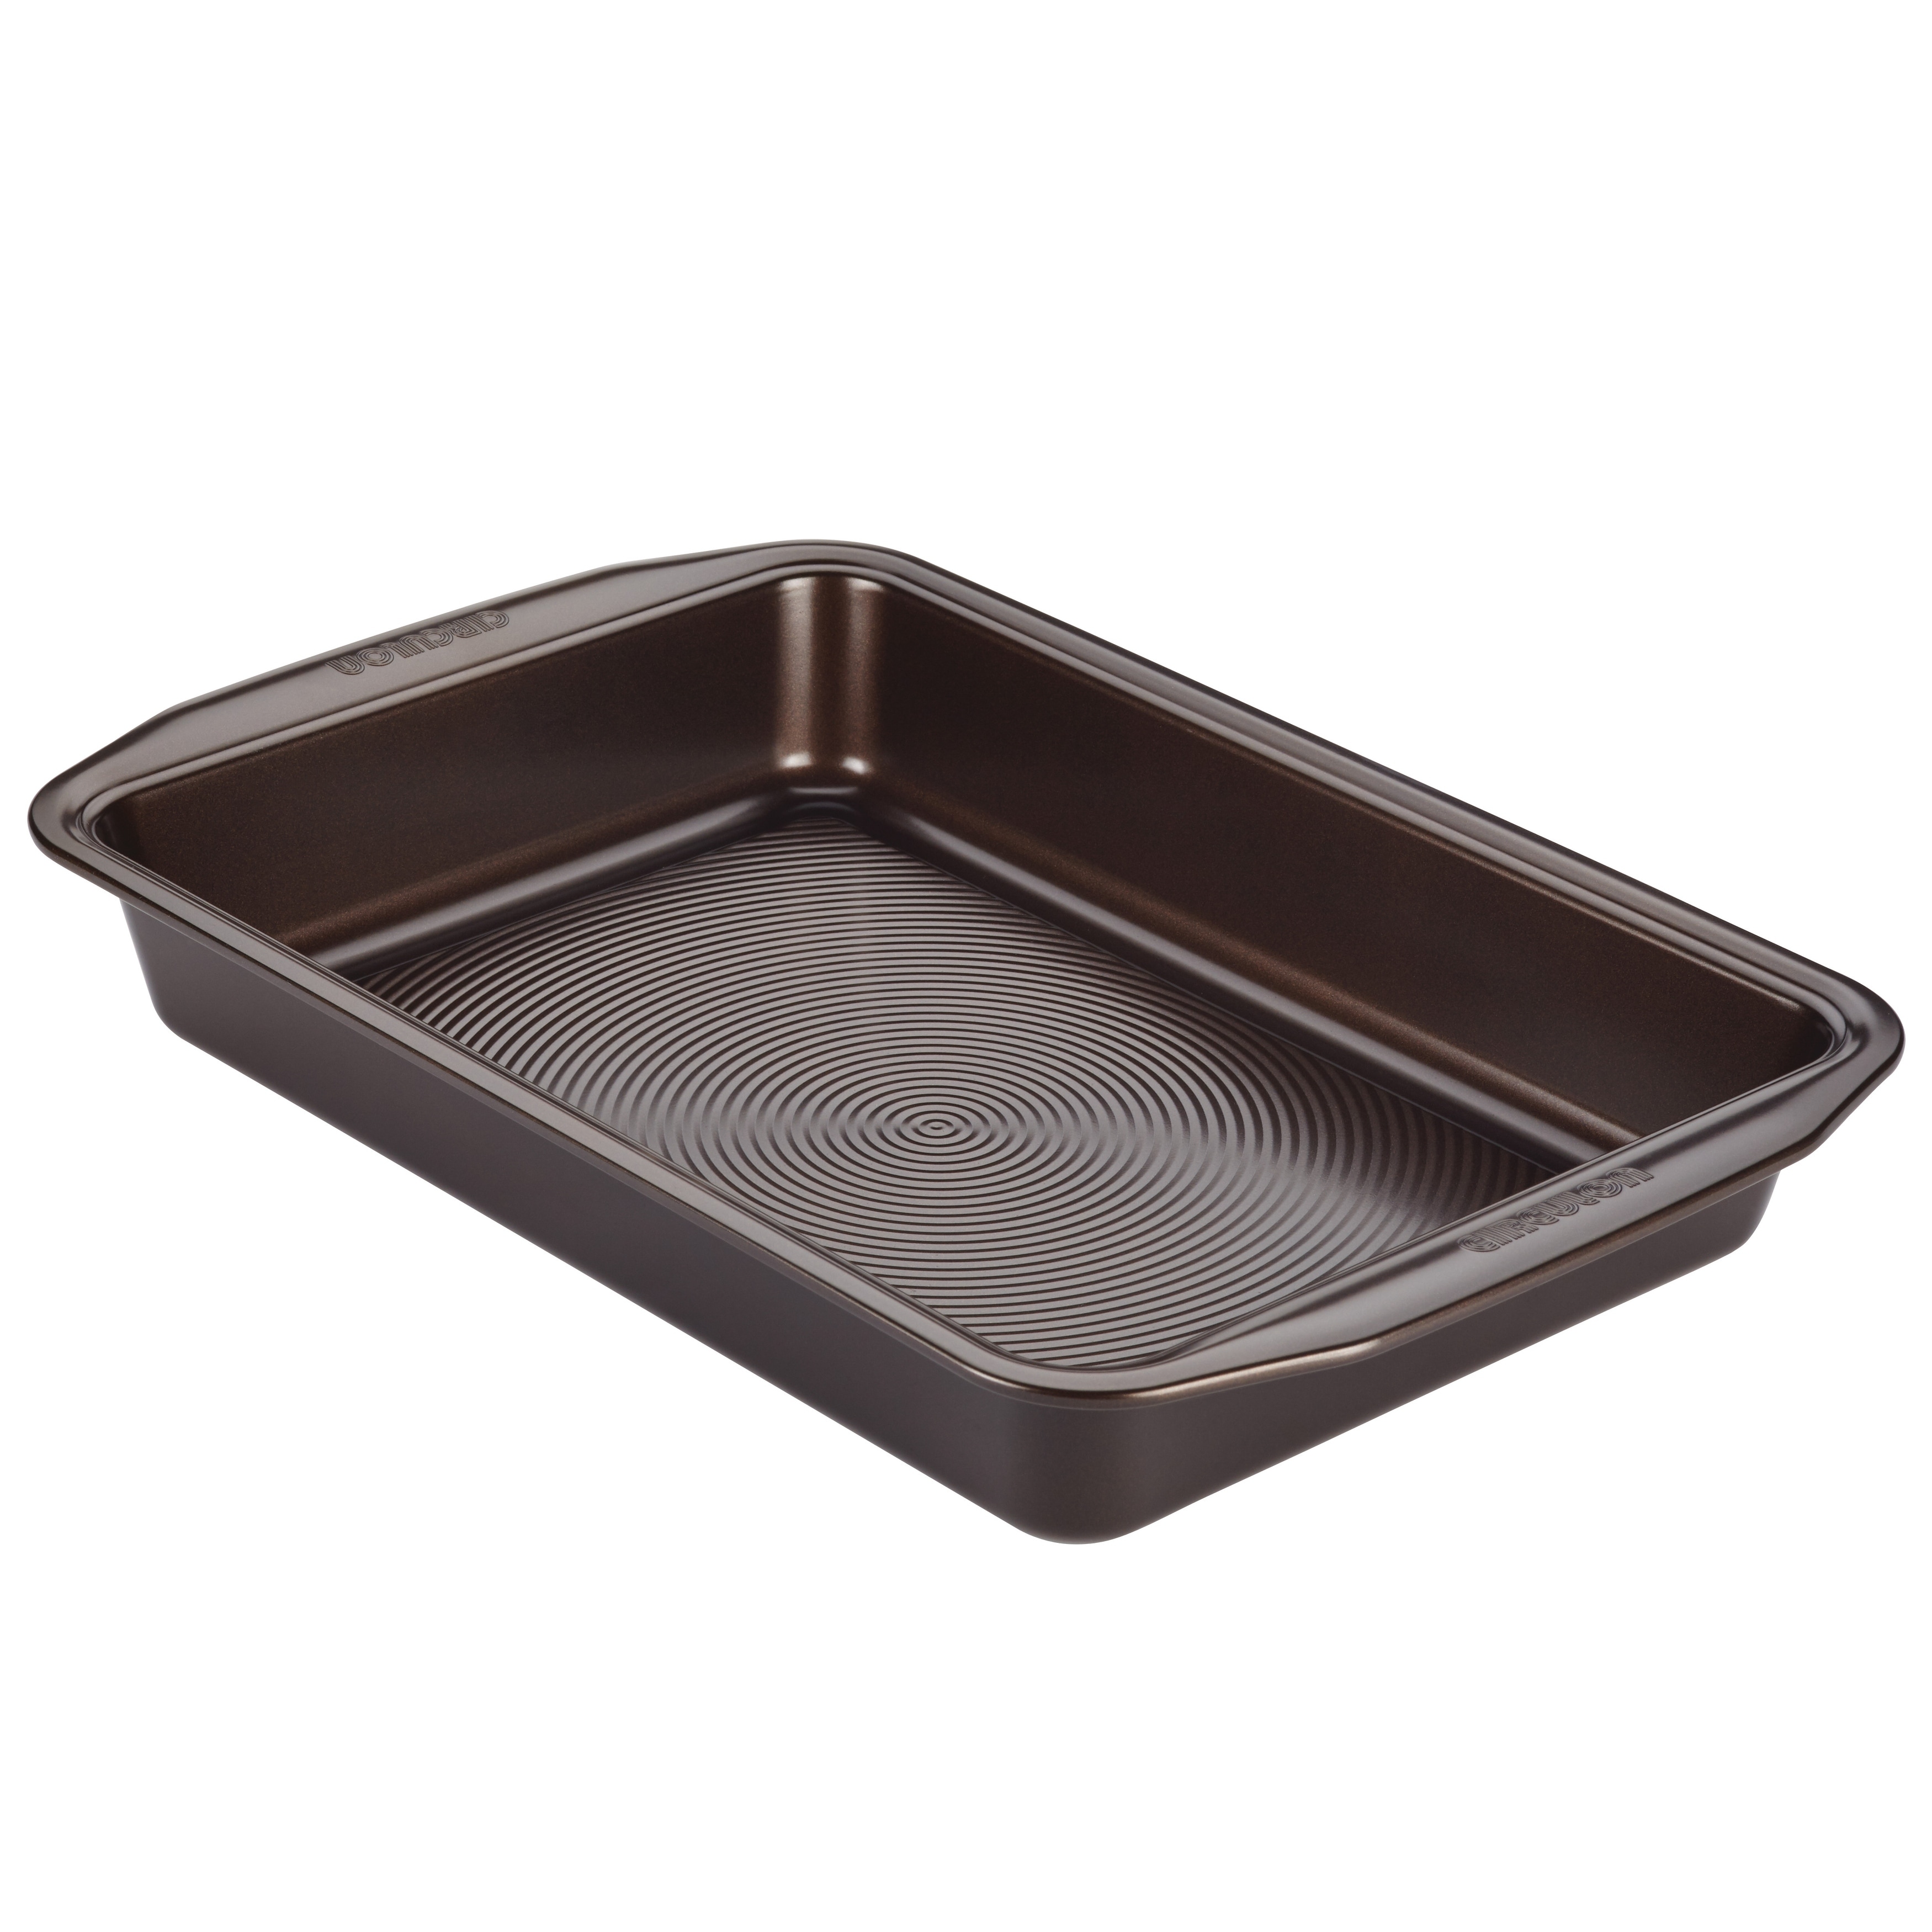 https://ak1.ostkcdn.com/images/products/is/images/direct/fdda844fcc6c4bf34957431f3dbfcc230aa34d00/Circulon-Bakeware-Nonstick-Rectangular-Cake-Pan%2C-9-Inch-x-13-Inch%2C-Chocolate-Brown.jpg